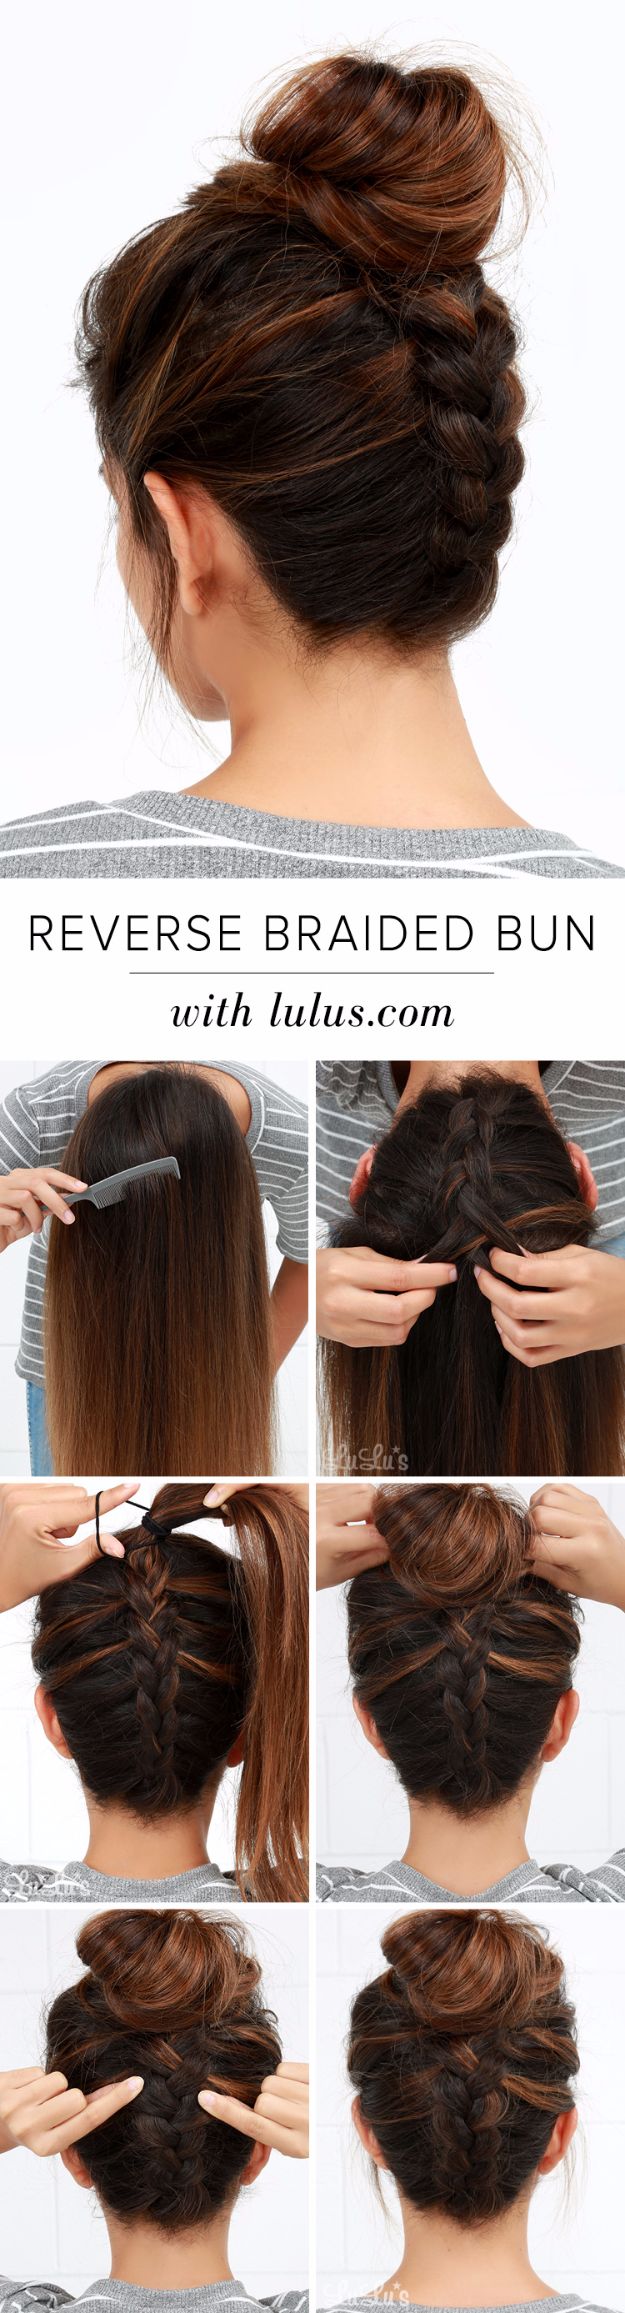 Easy Braids With Tutorials - Reverse Braided Bun - Cute Braiding Tutorials for Teens, Girls and Women - Easy Step by Step Braid Ideas - Quick Hairstyles for School - Creative Braids for Teenagers - Tutorial and Instructions for Hair Braiding 